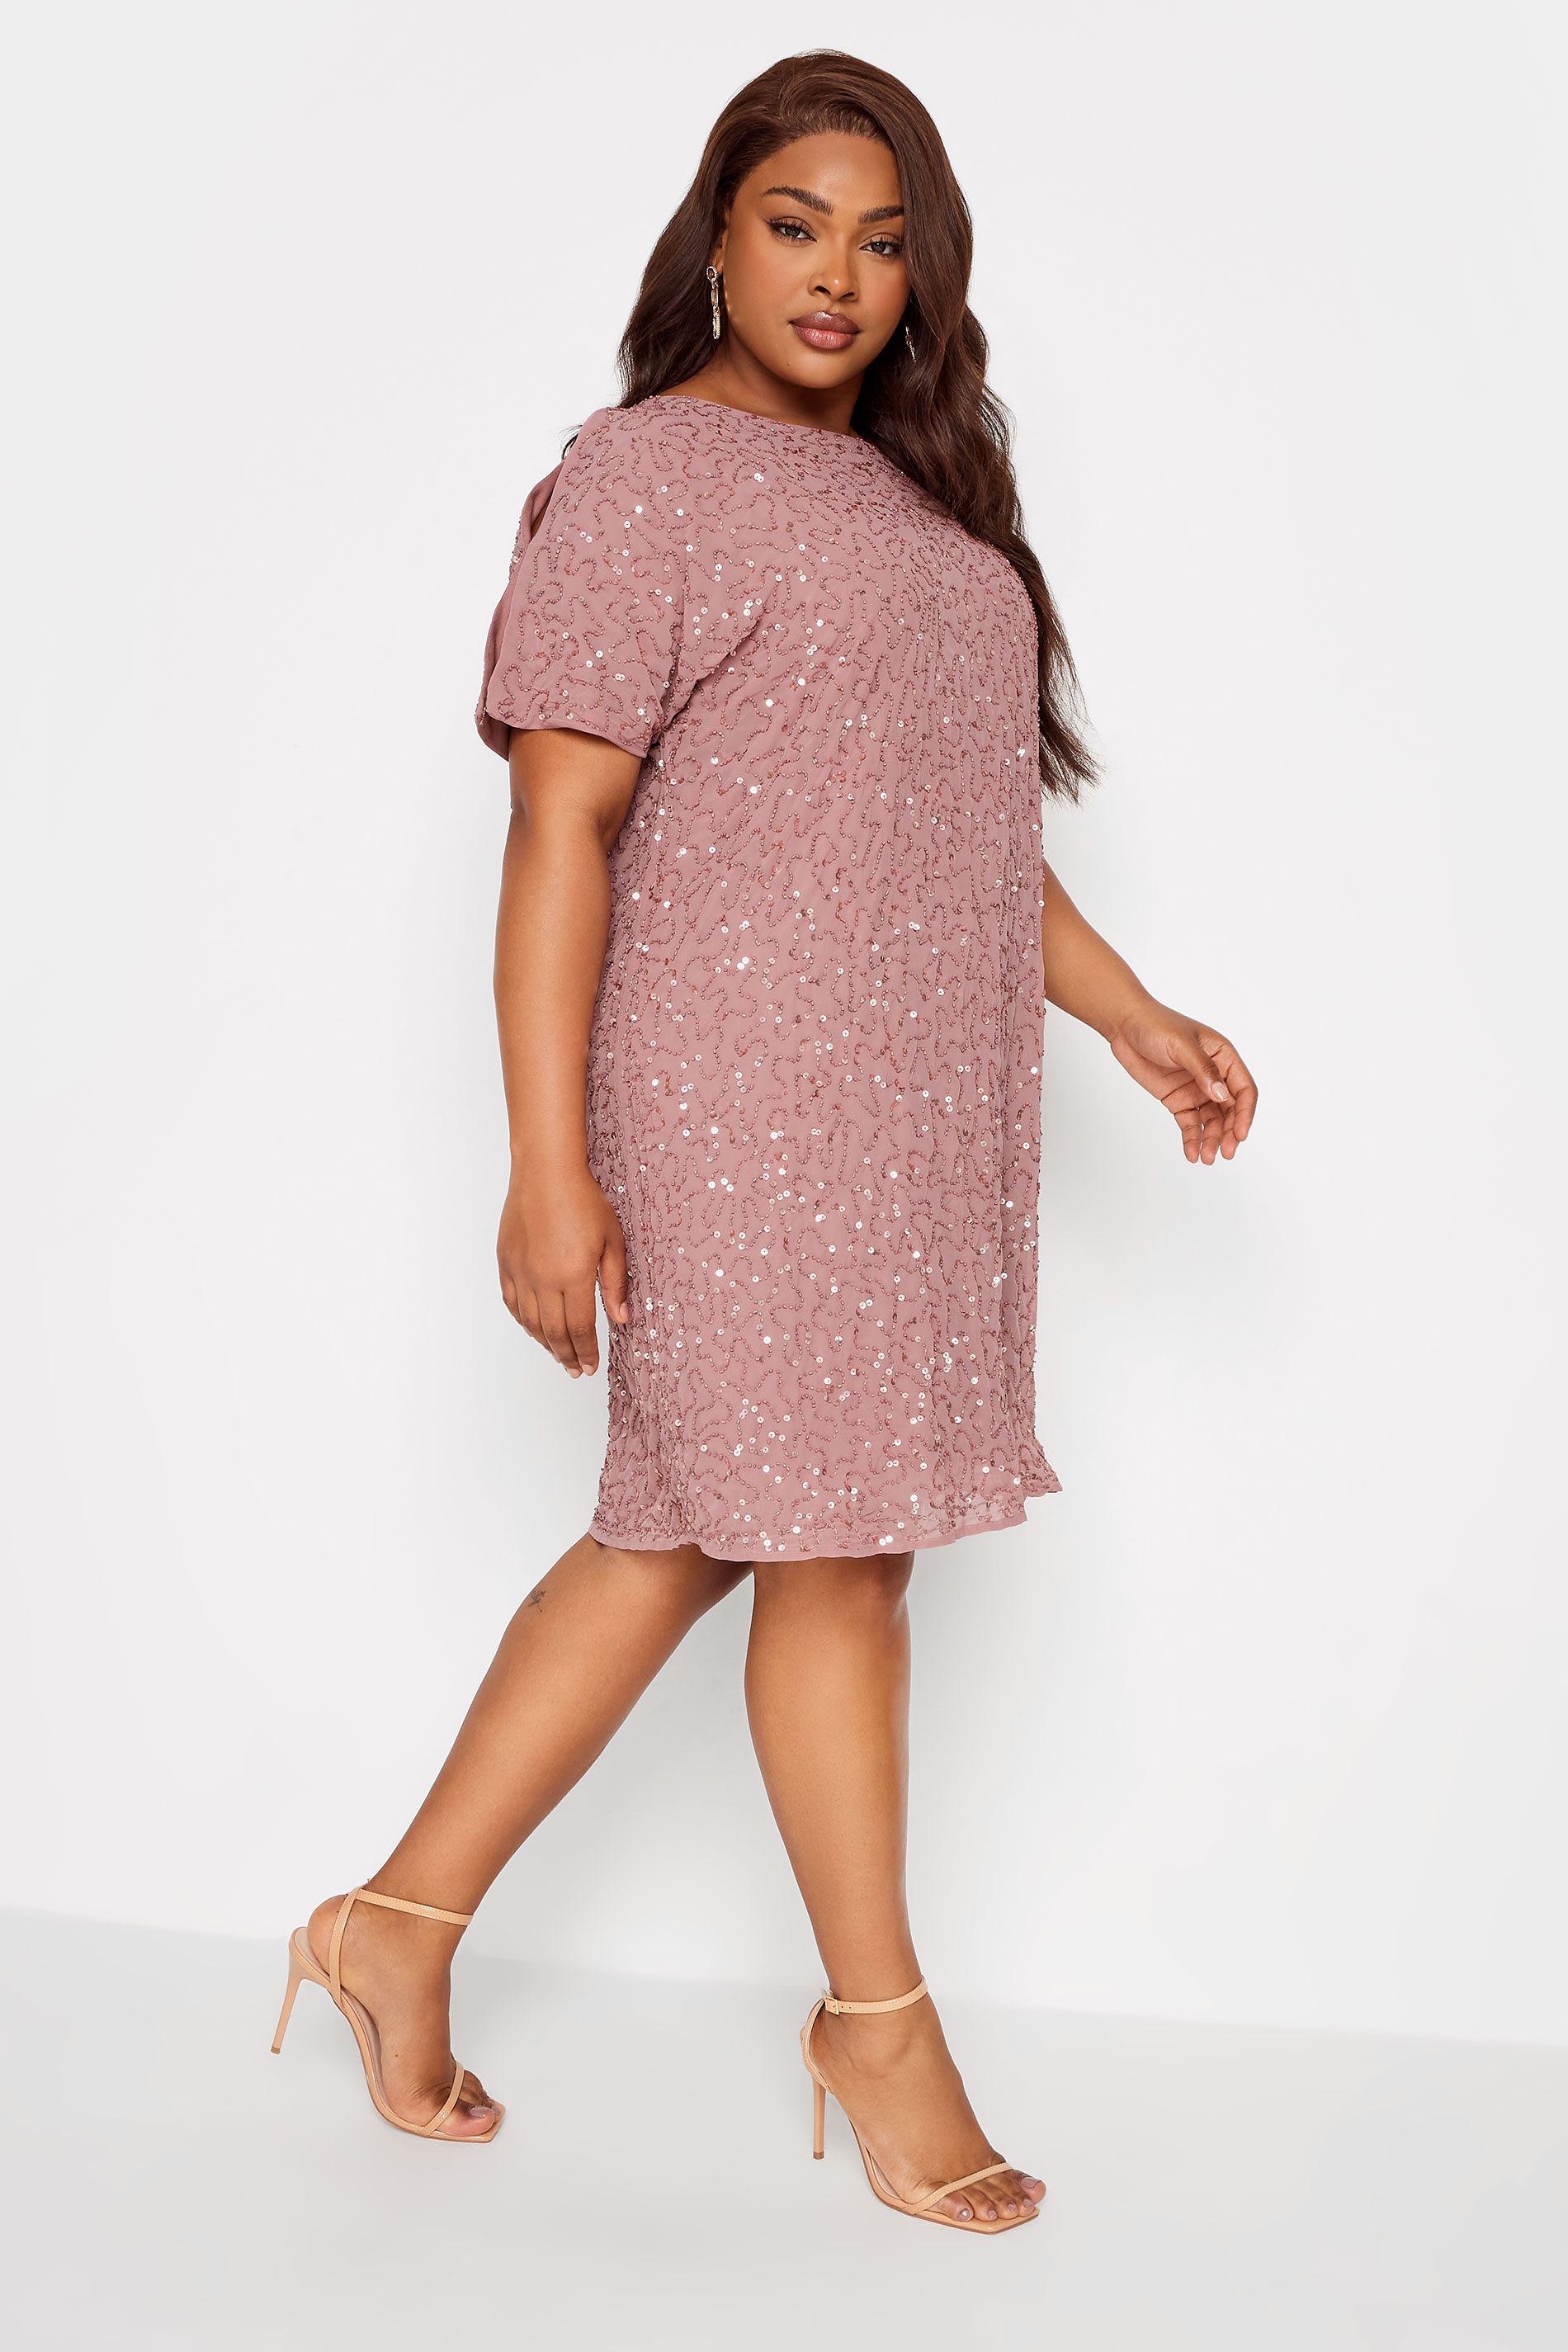 LUXE Plus Size Light Pink Sequin Hand Embellished Cape Dress | Yours Clothing 2